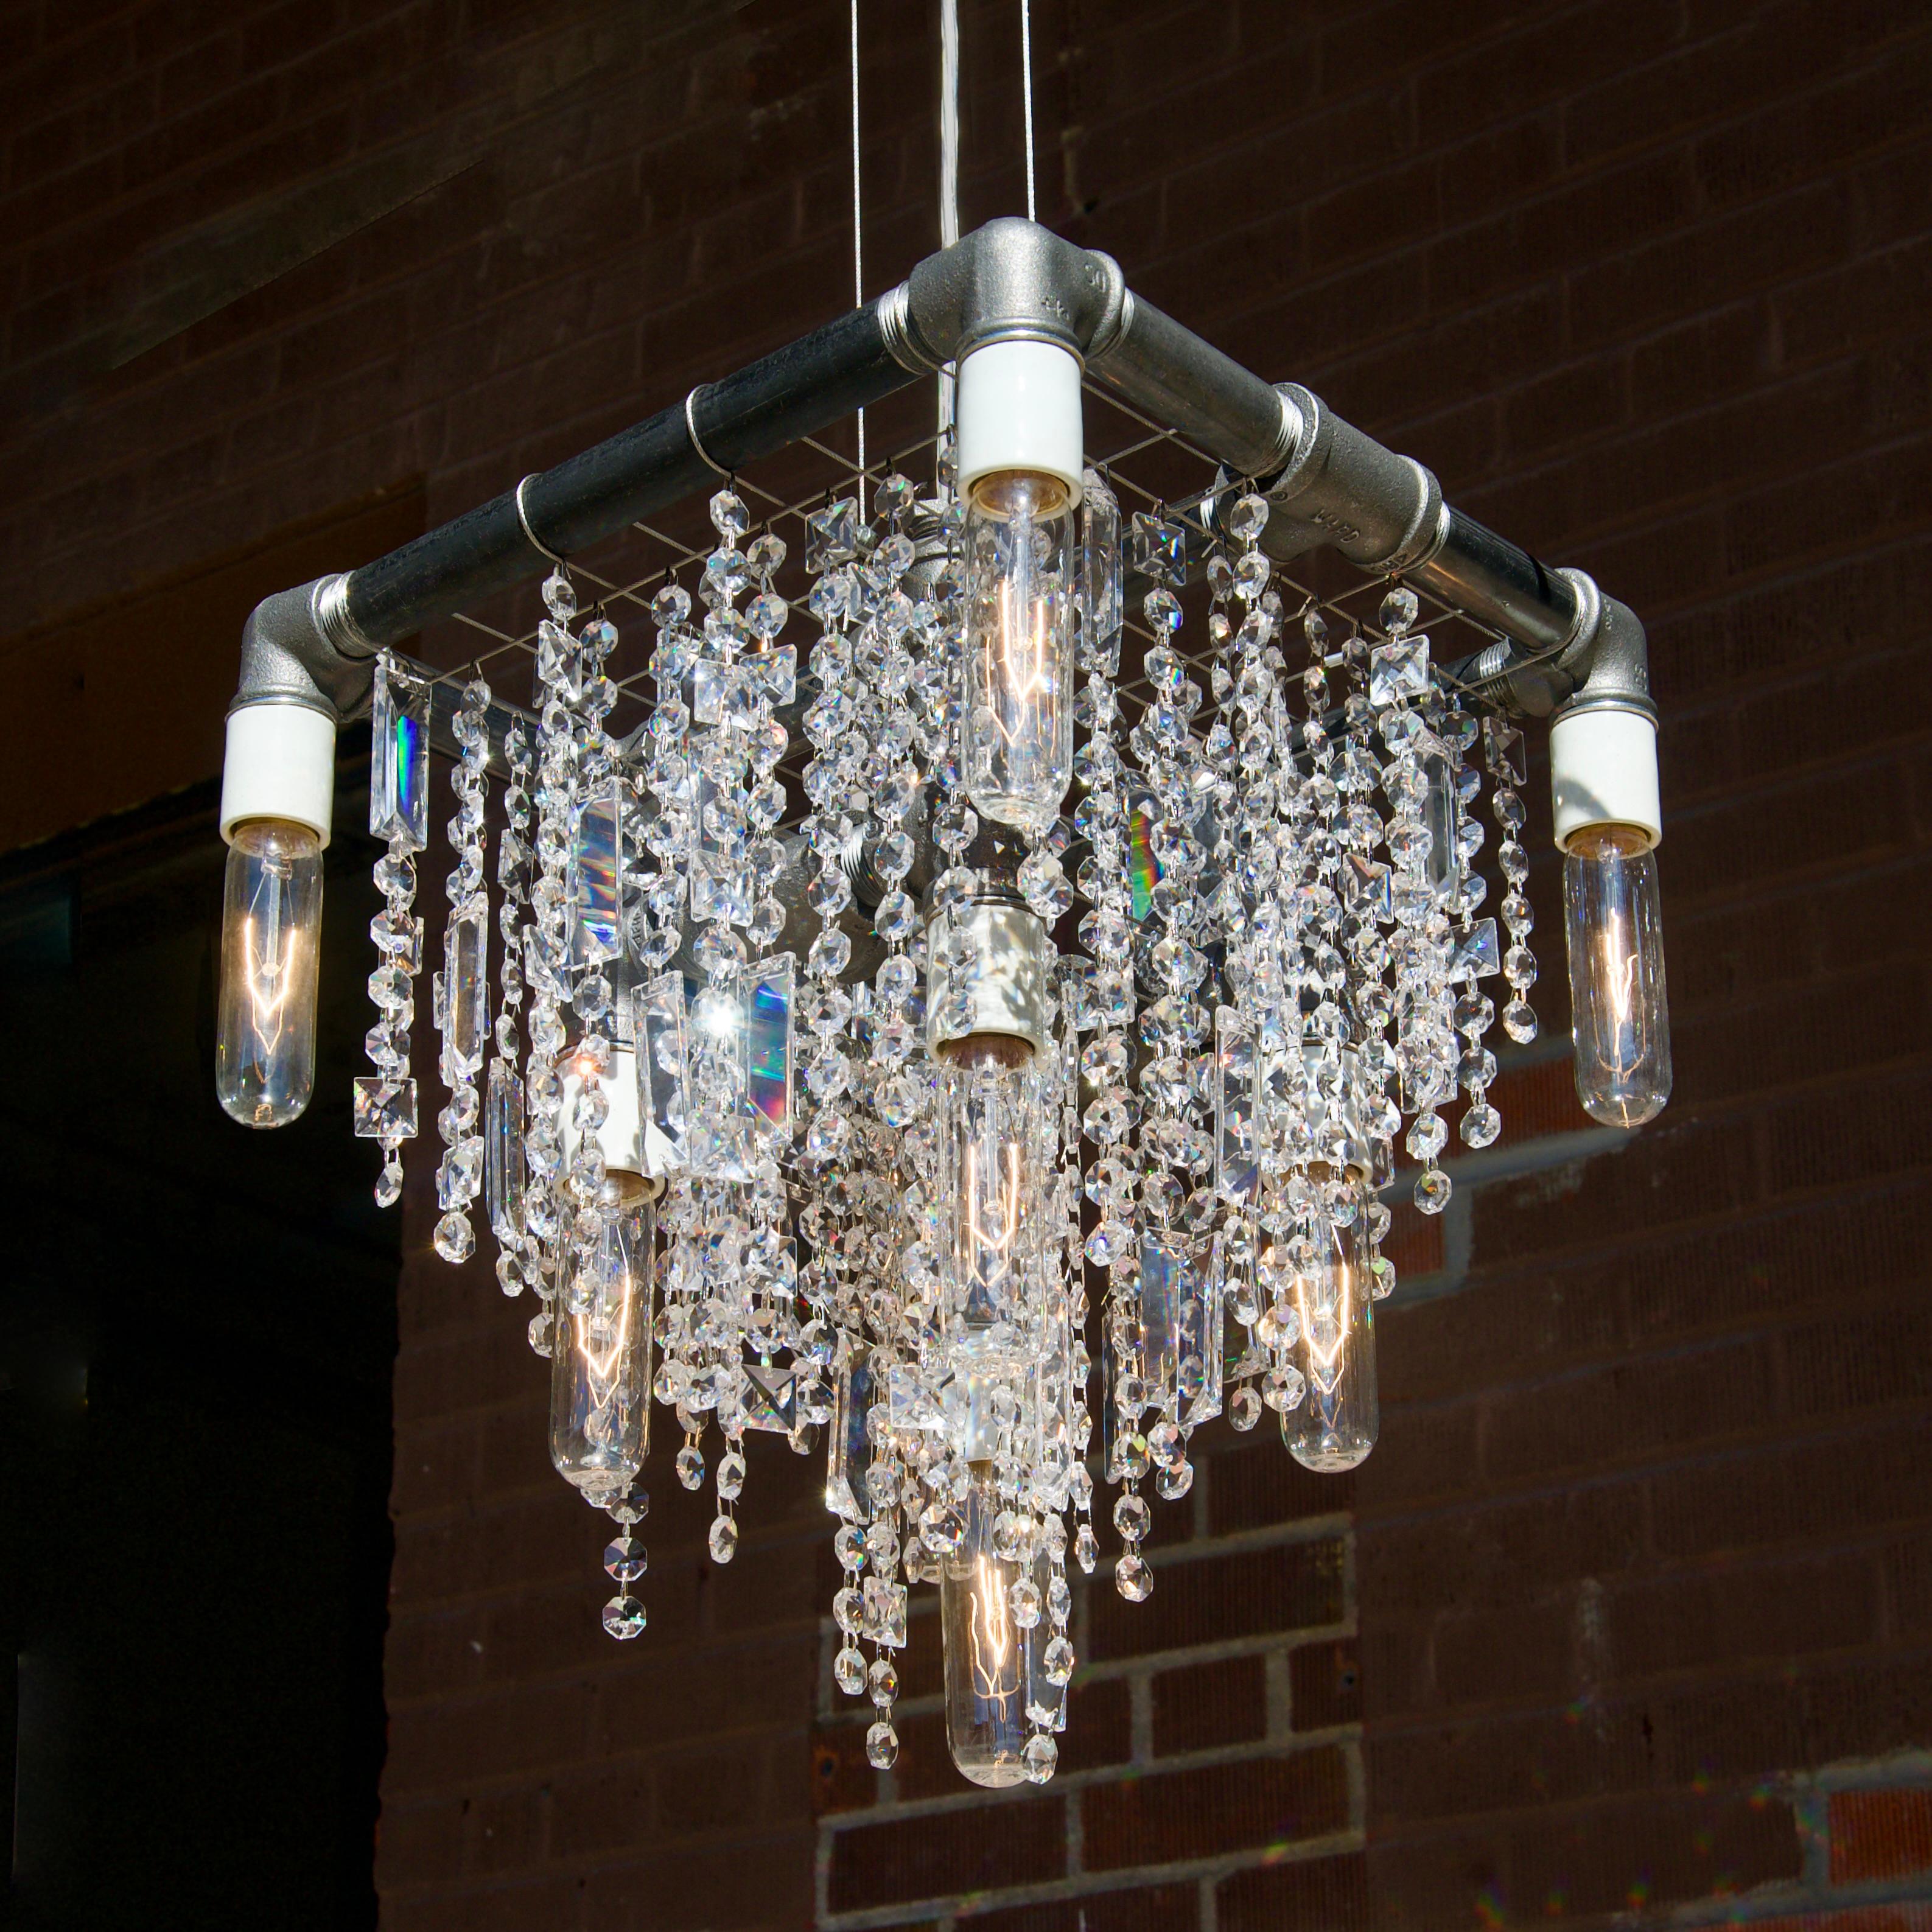 The industrial 9-bulb compact Beacon pendant chandelier is the newest model in our Industrial Collection and one of the most spectacular. At first glance it appears to be a traditional 3-tiered chandelier, though the sparkle will alert you to the